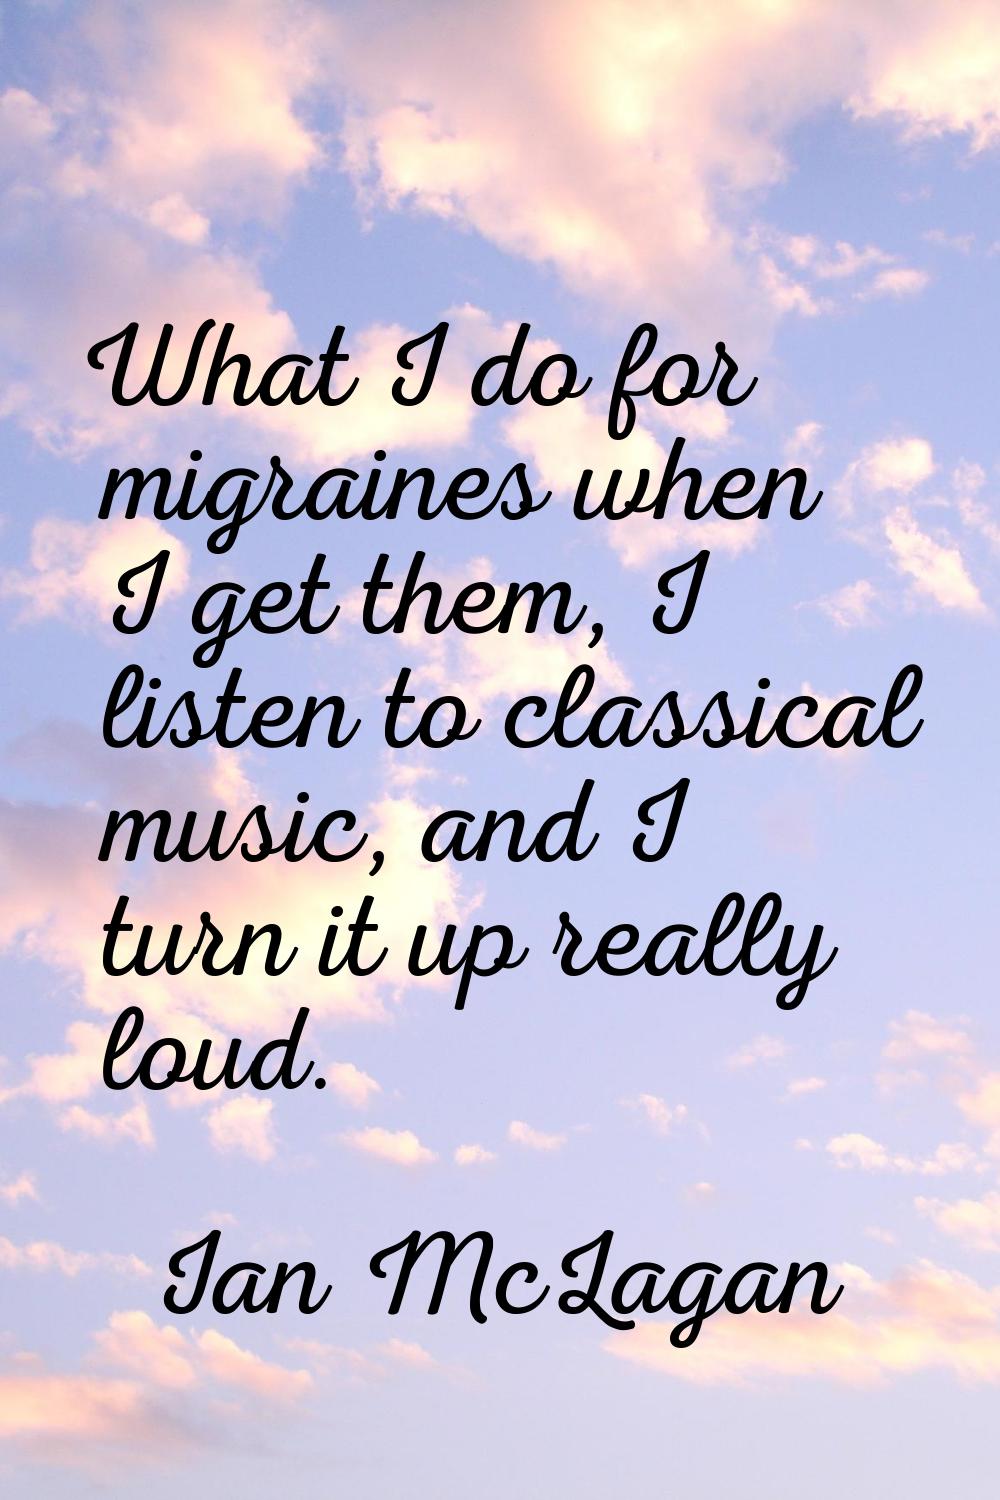 What I do for migraines when I get them, I listen to classical music, and I turn it up really loud.